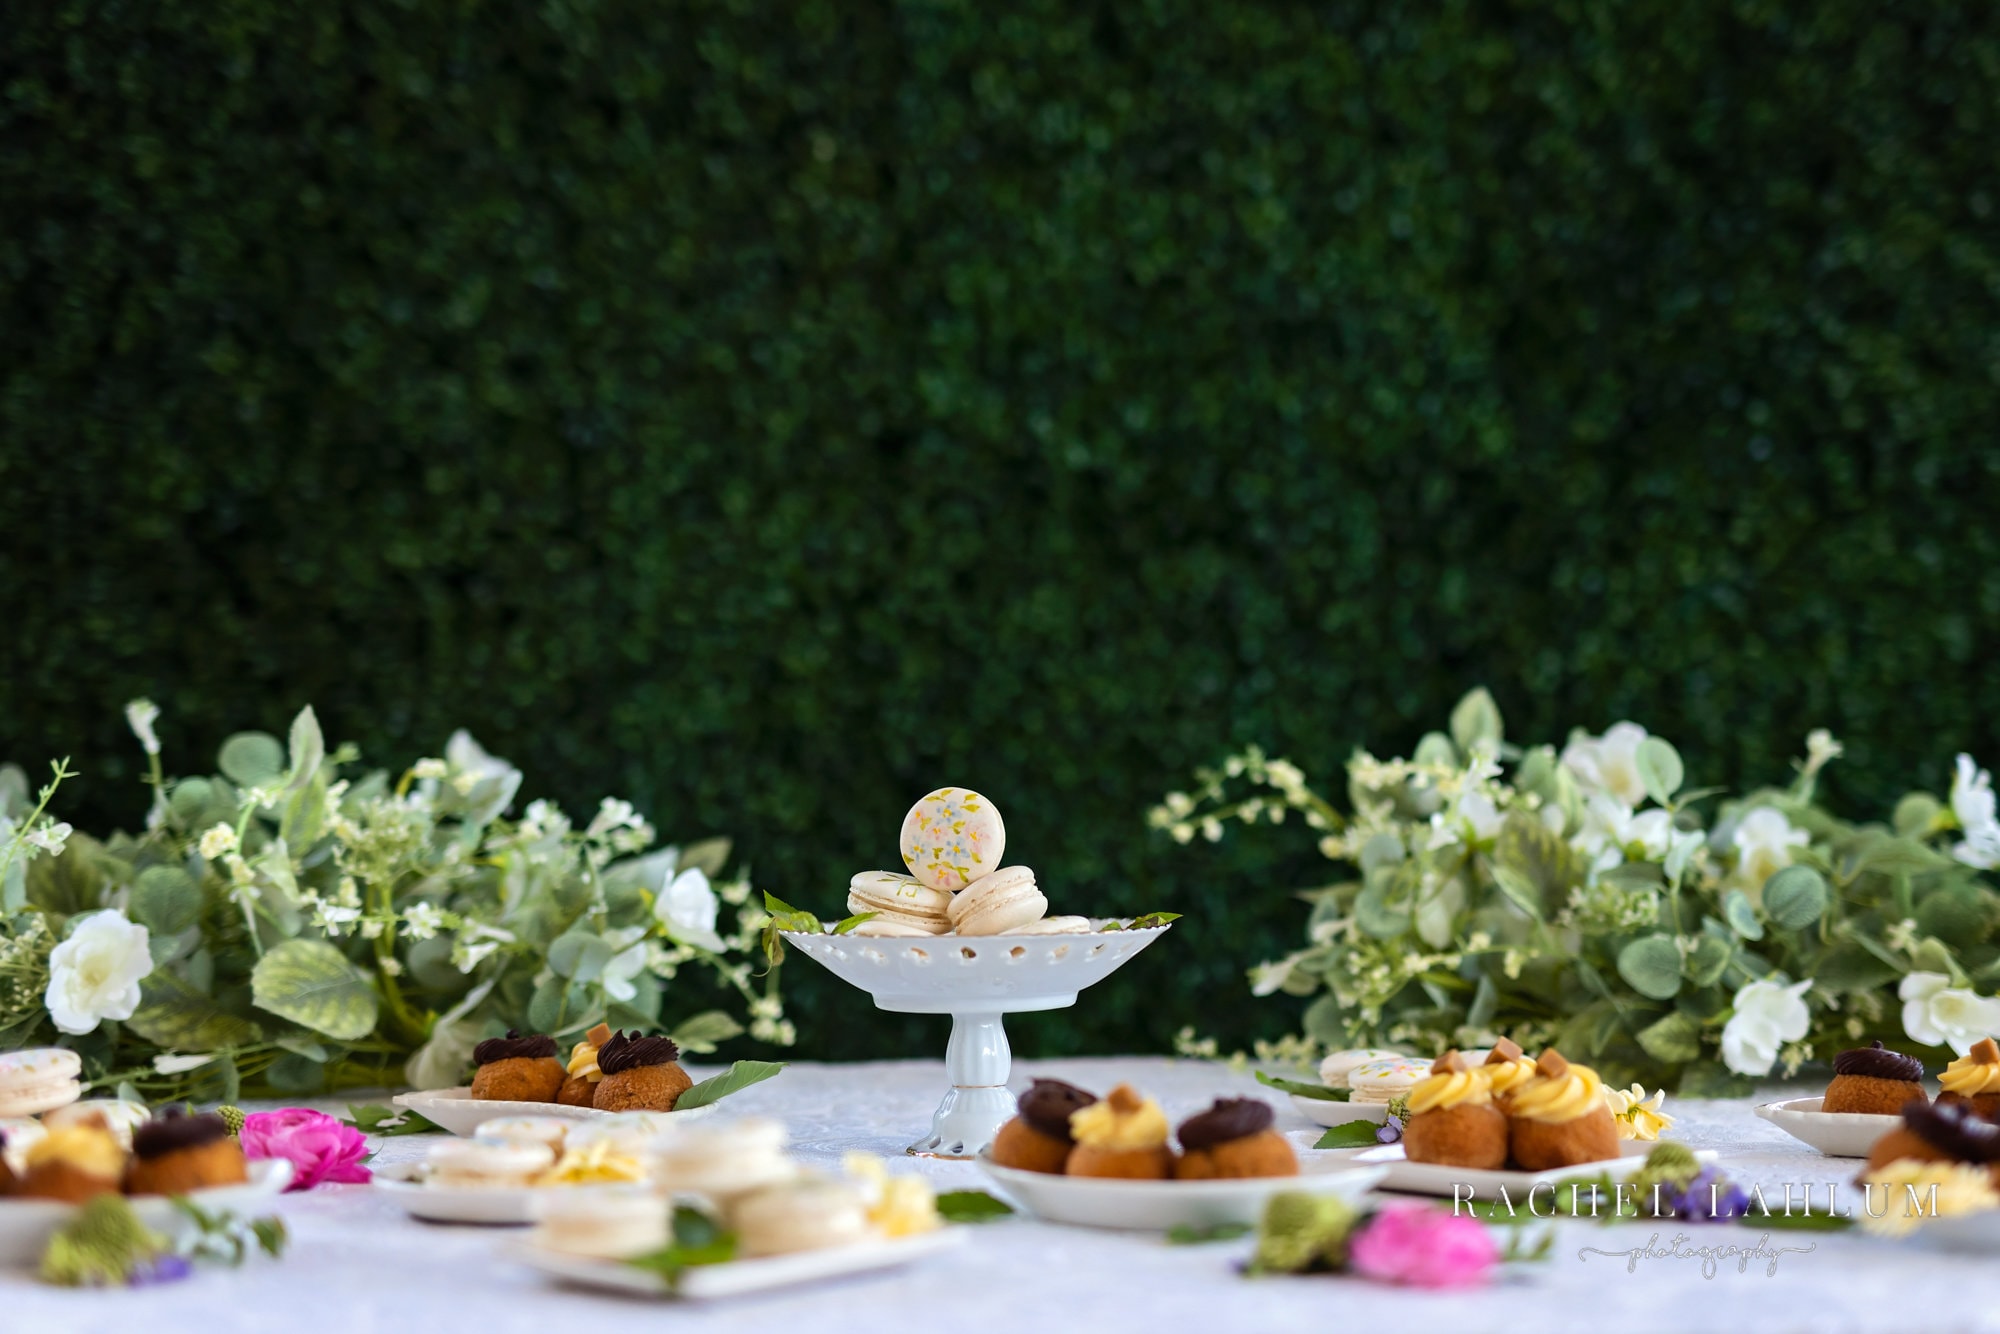 Desserts displayed in front of floral arrangements and live moss wall at Urban Daisy wedding space. 